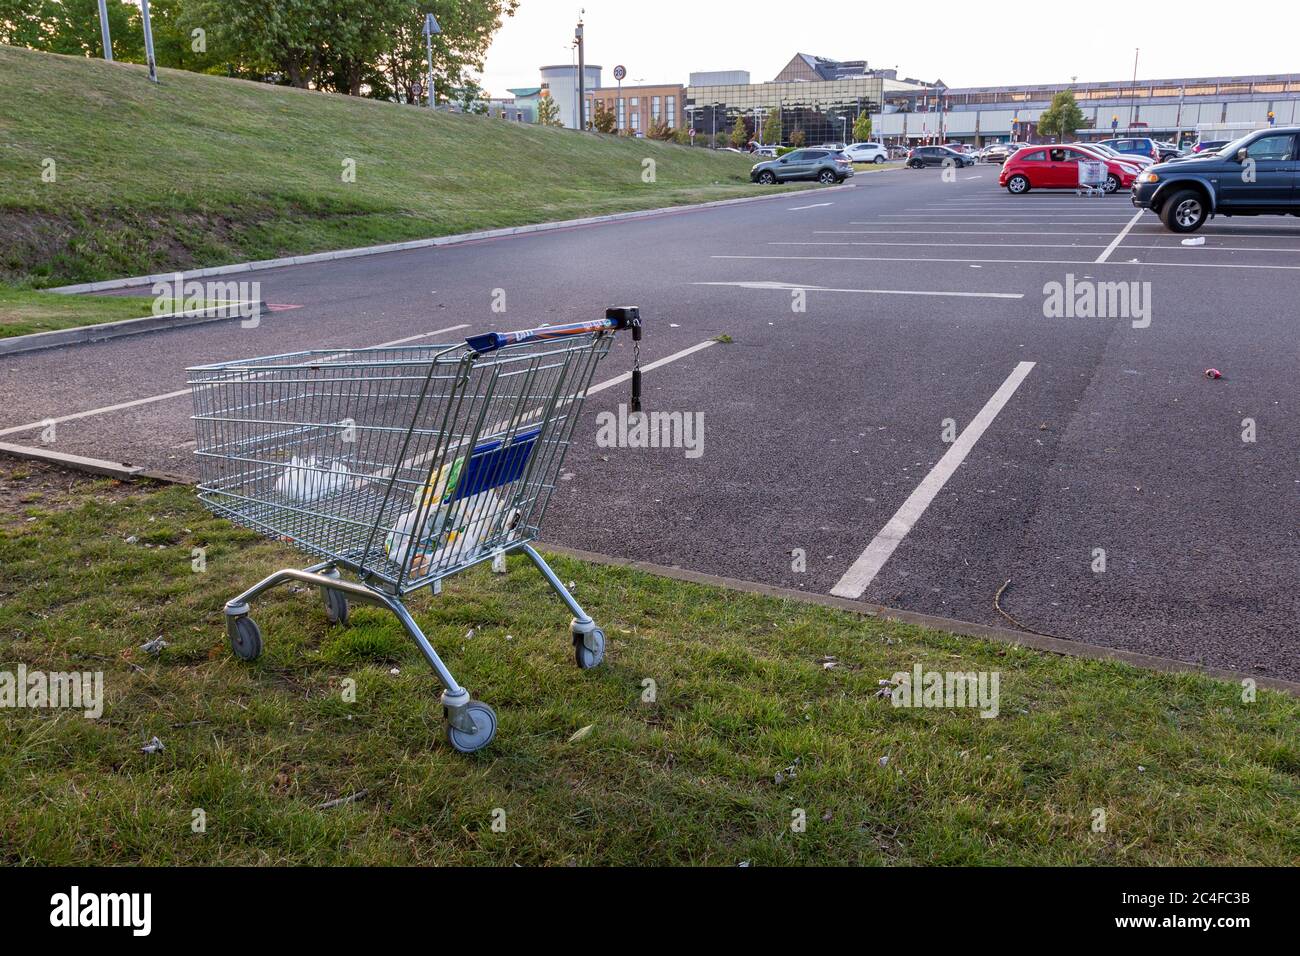 Shopping trolley or cart abandoned on a shopping centre car park UK Stock Photo